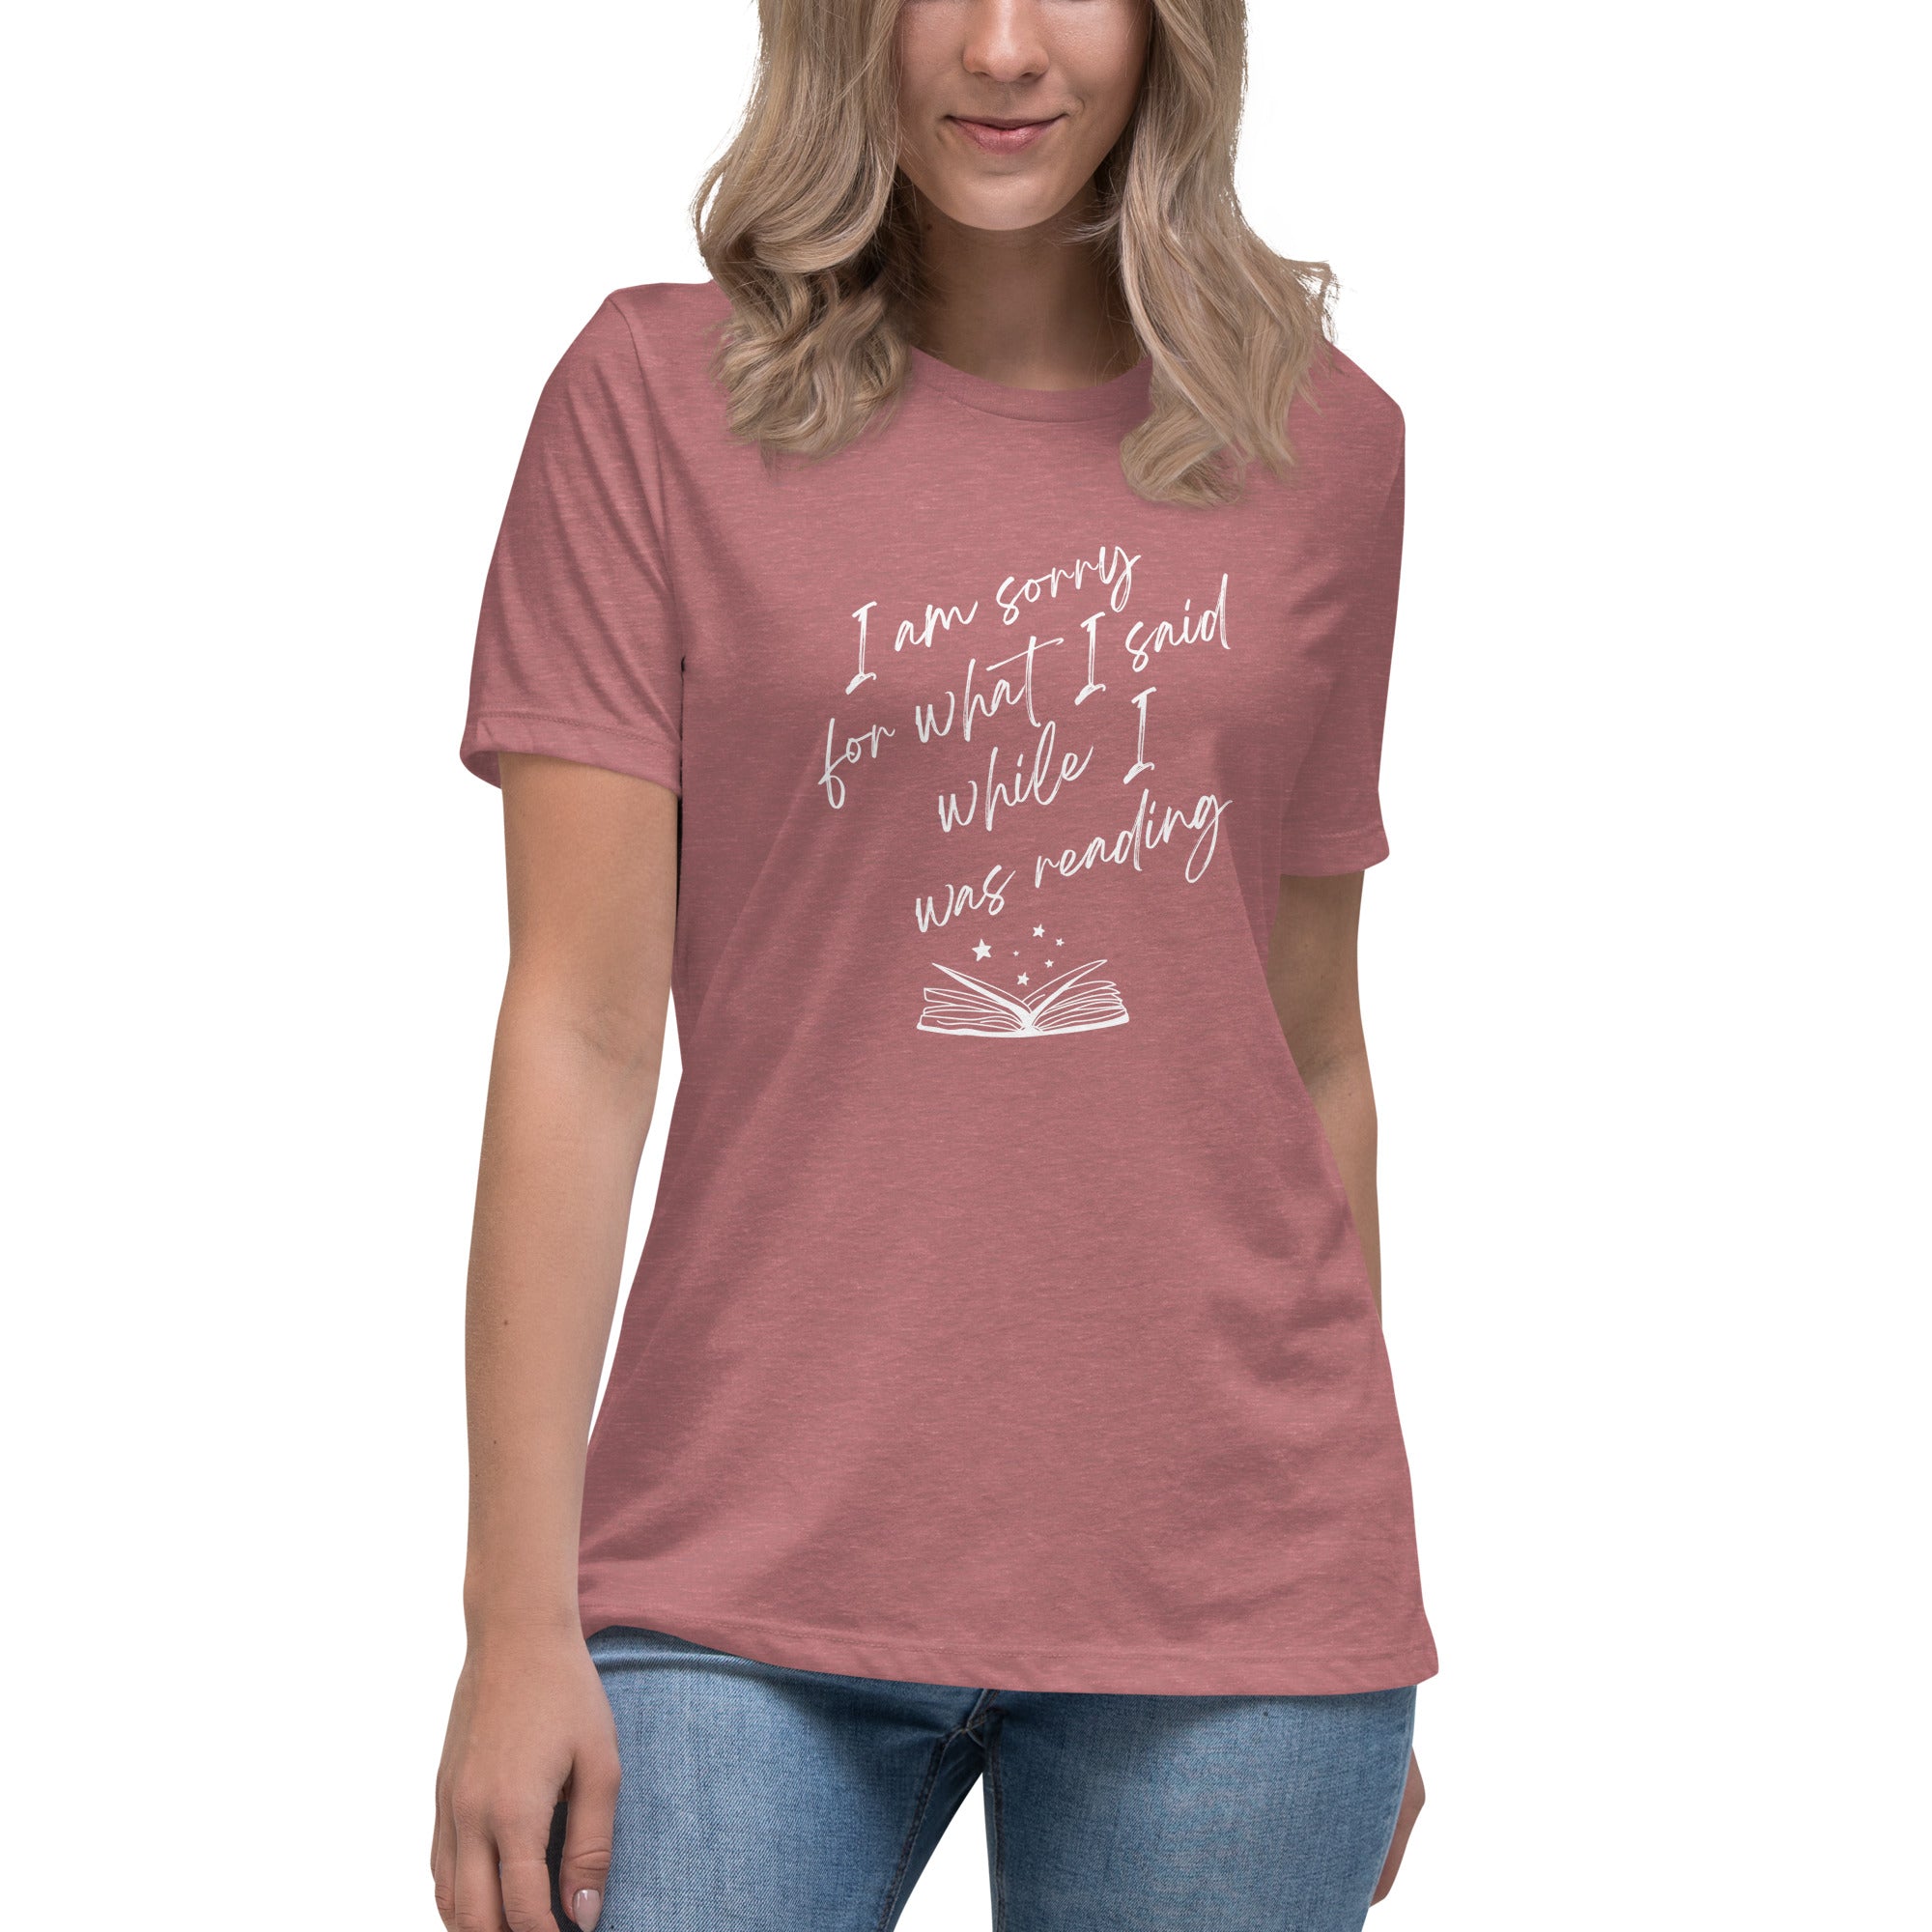 WHITE TEXT Women's Relaxed T-Shirt Funny Bookish Shirt